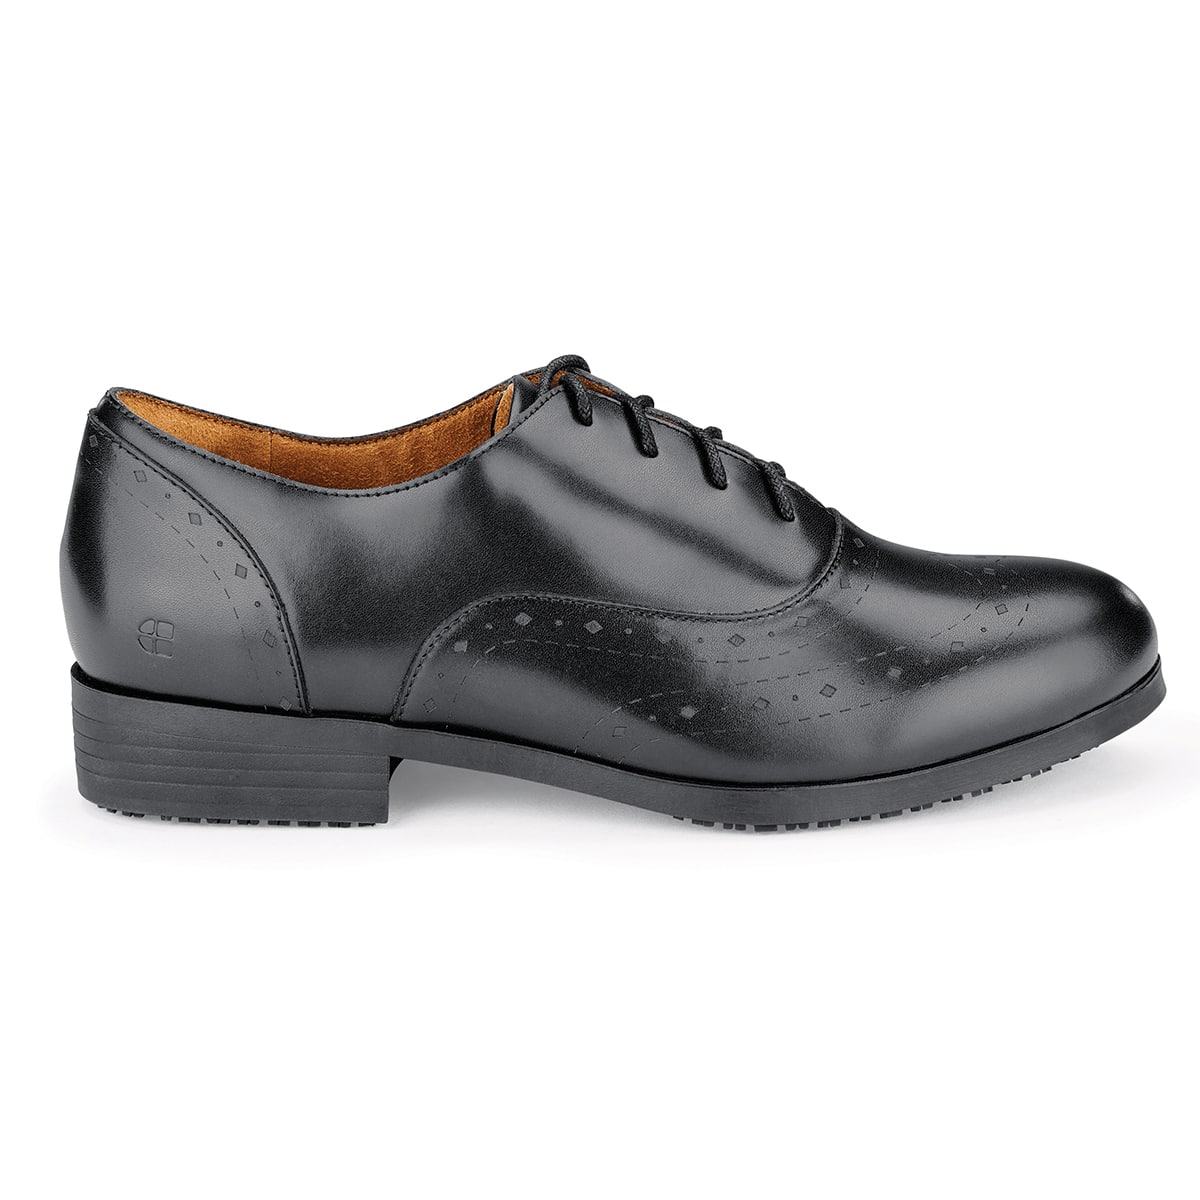 The Kora from Shoes For Crews are slip-resistant dress shoes, seen from the right.